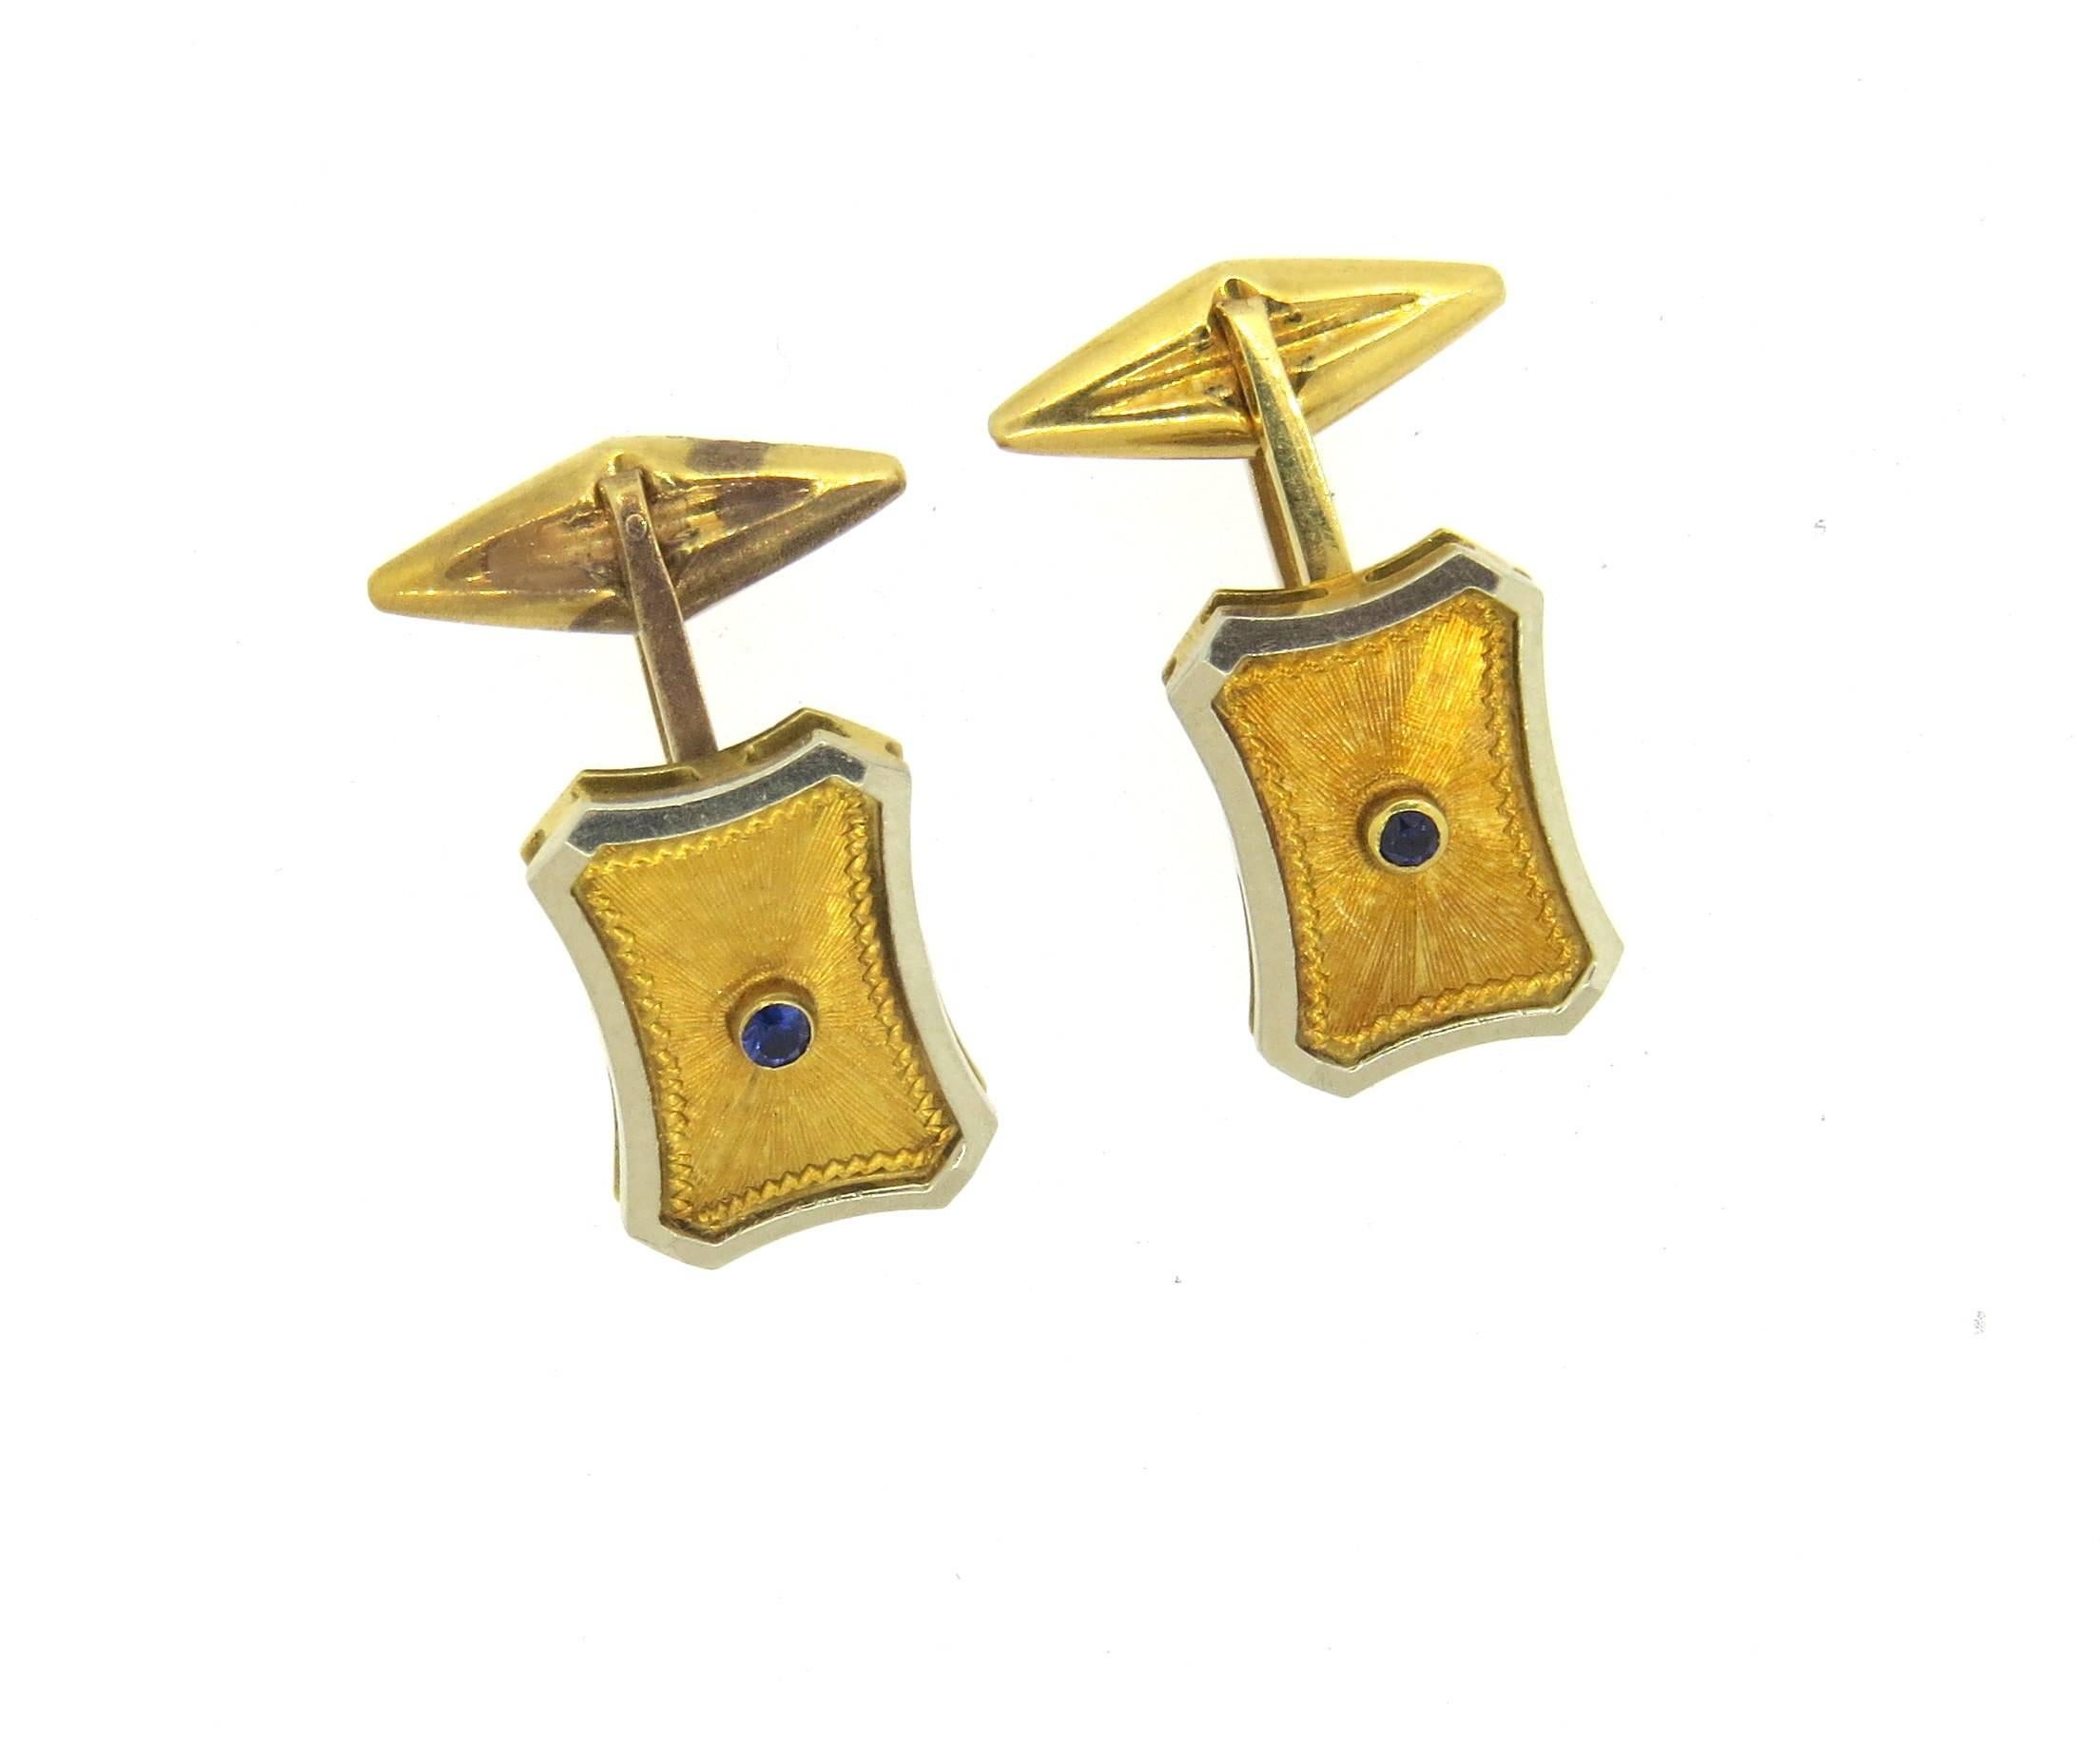 Pair of 18k white and yellow gold cufflinks, set with blue sapphires in the center. Each top measures 17mm x 12mm. Marked 750. Weight - 7.7 grams 